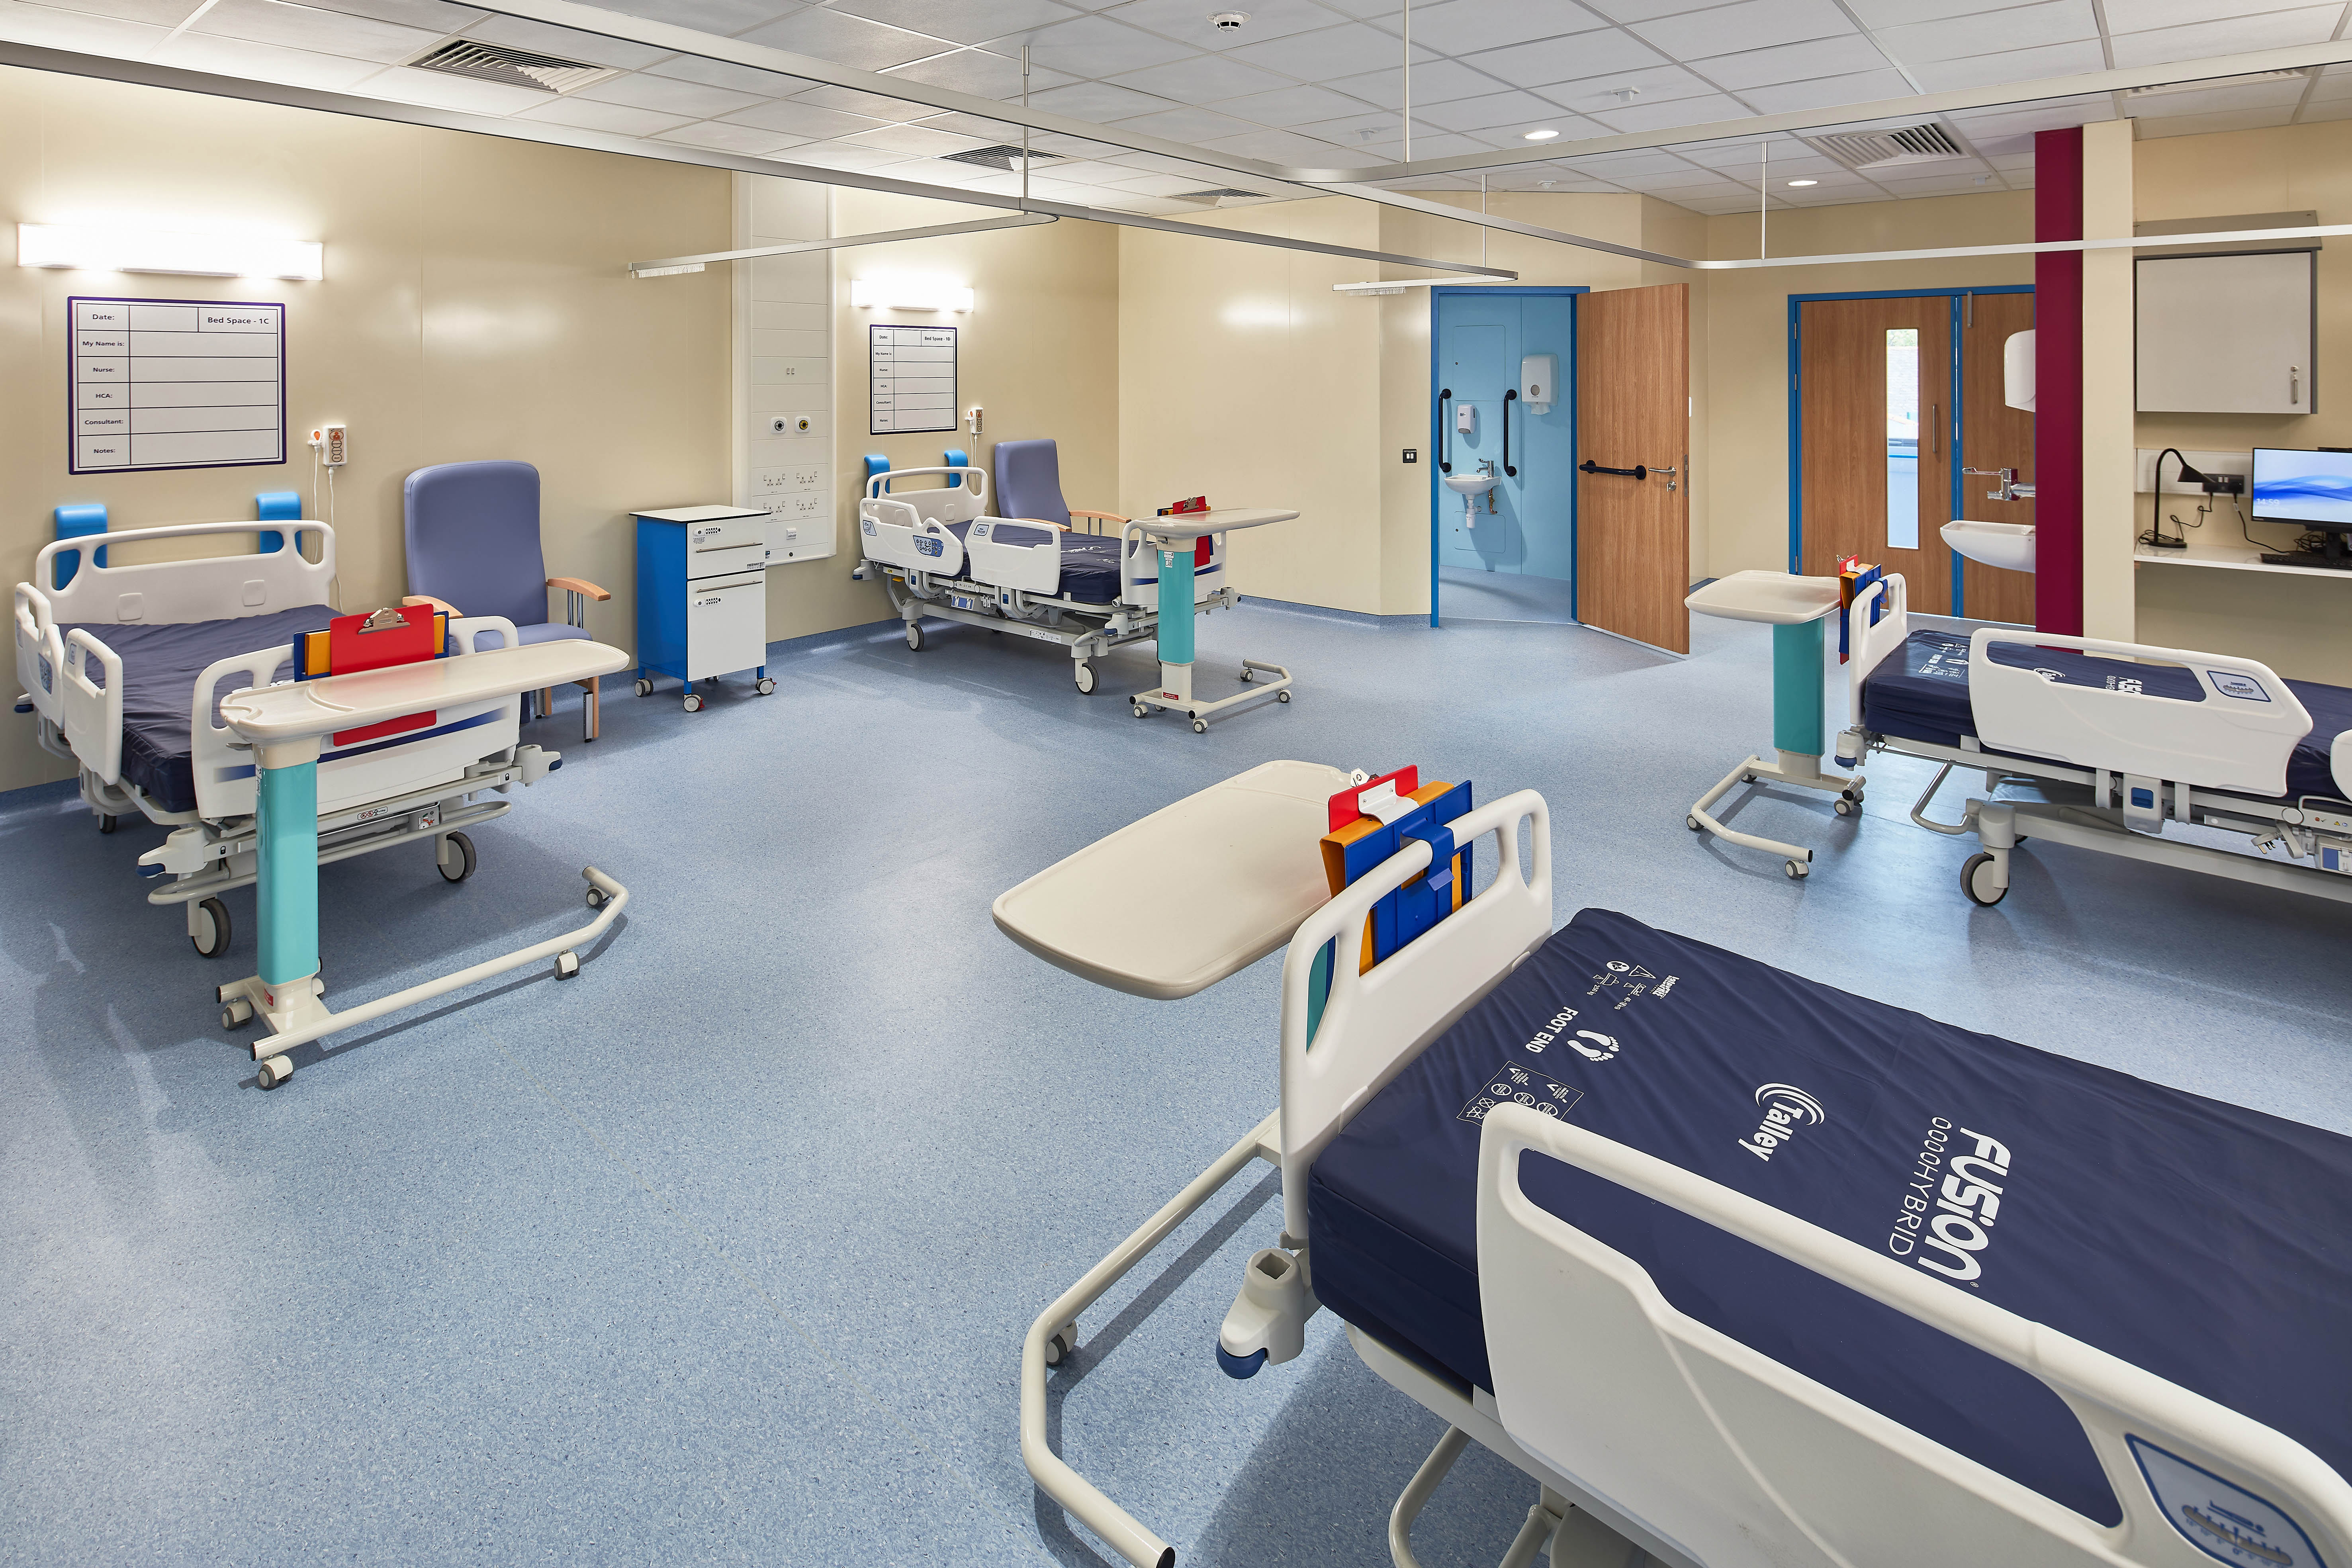 The ward has two four-bed wards, two one-bed wards, accessible bathrooms, ancillary rooms, and staff areas